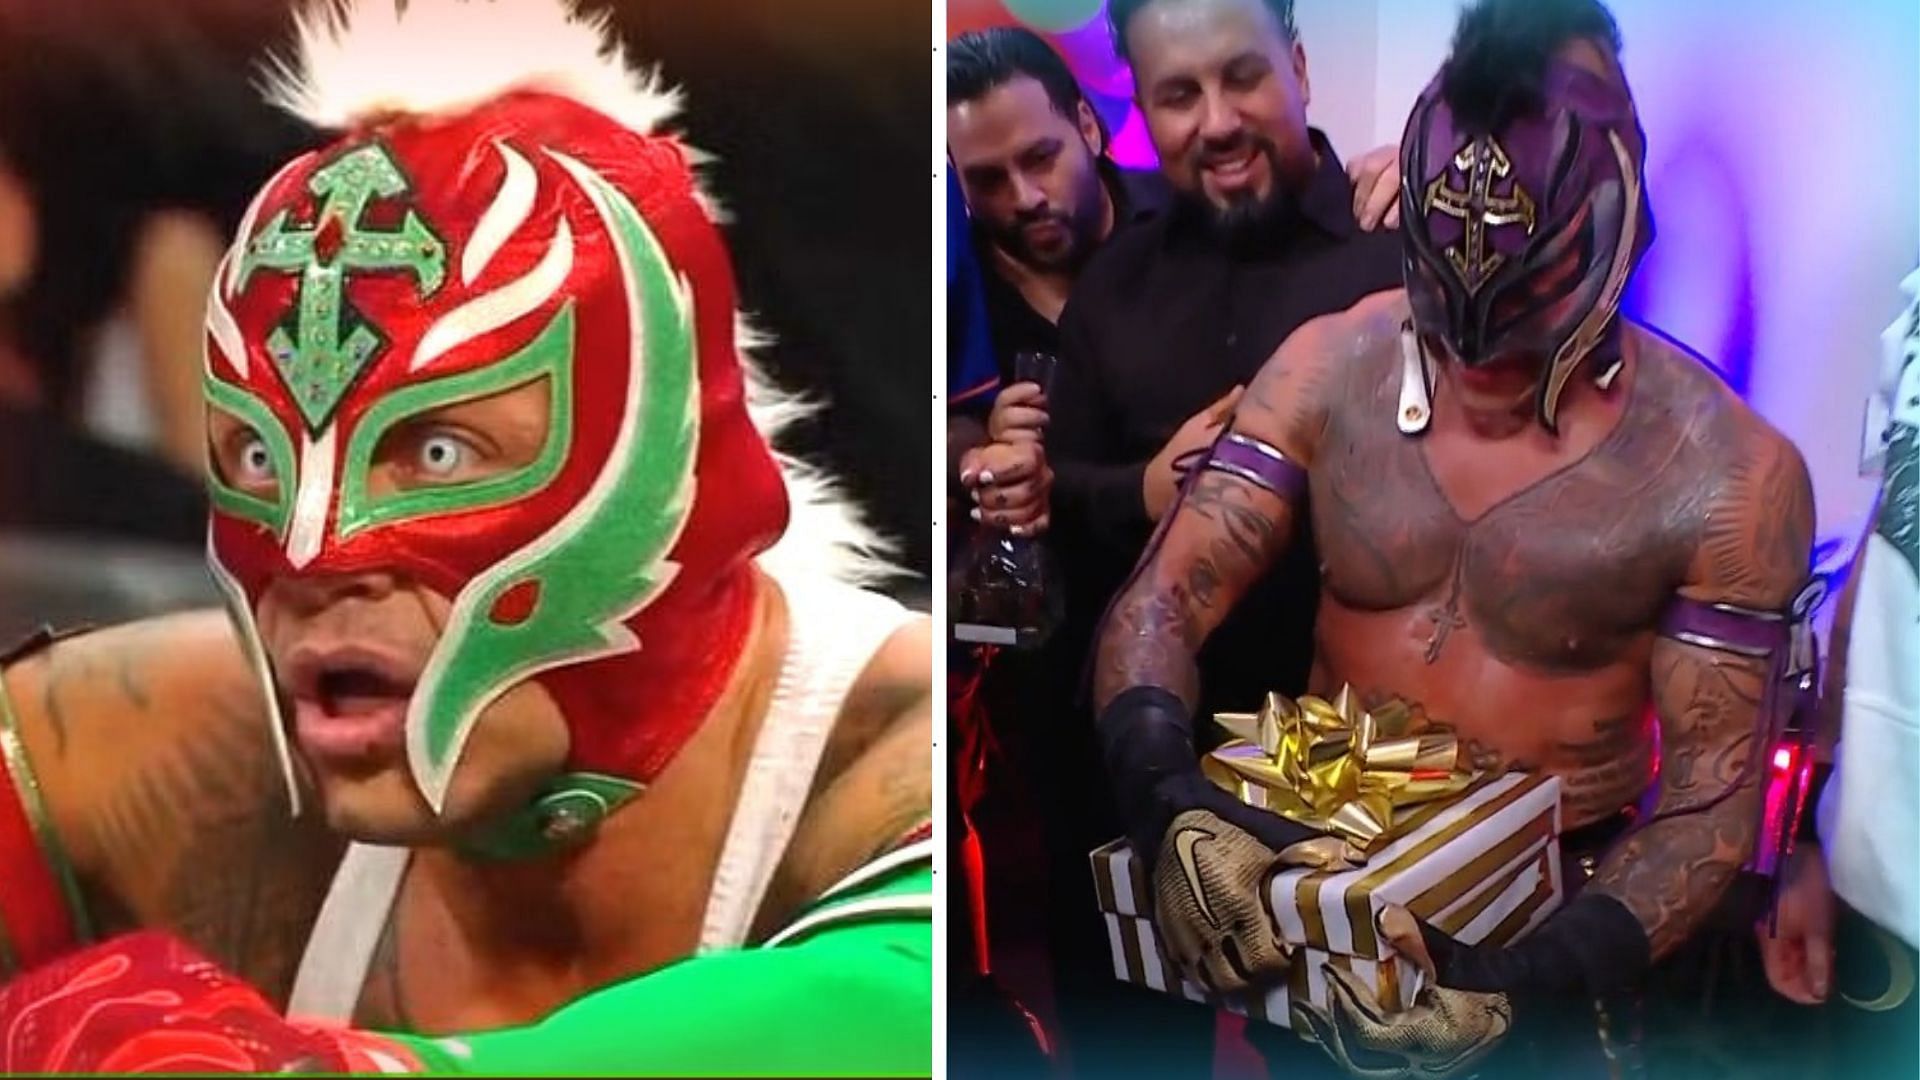 Rey Mysterio has had an extensive contribution to WWE in the past two decades